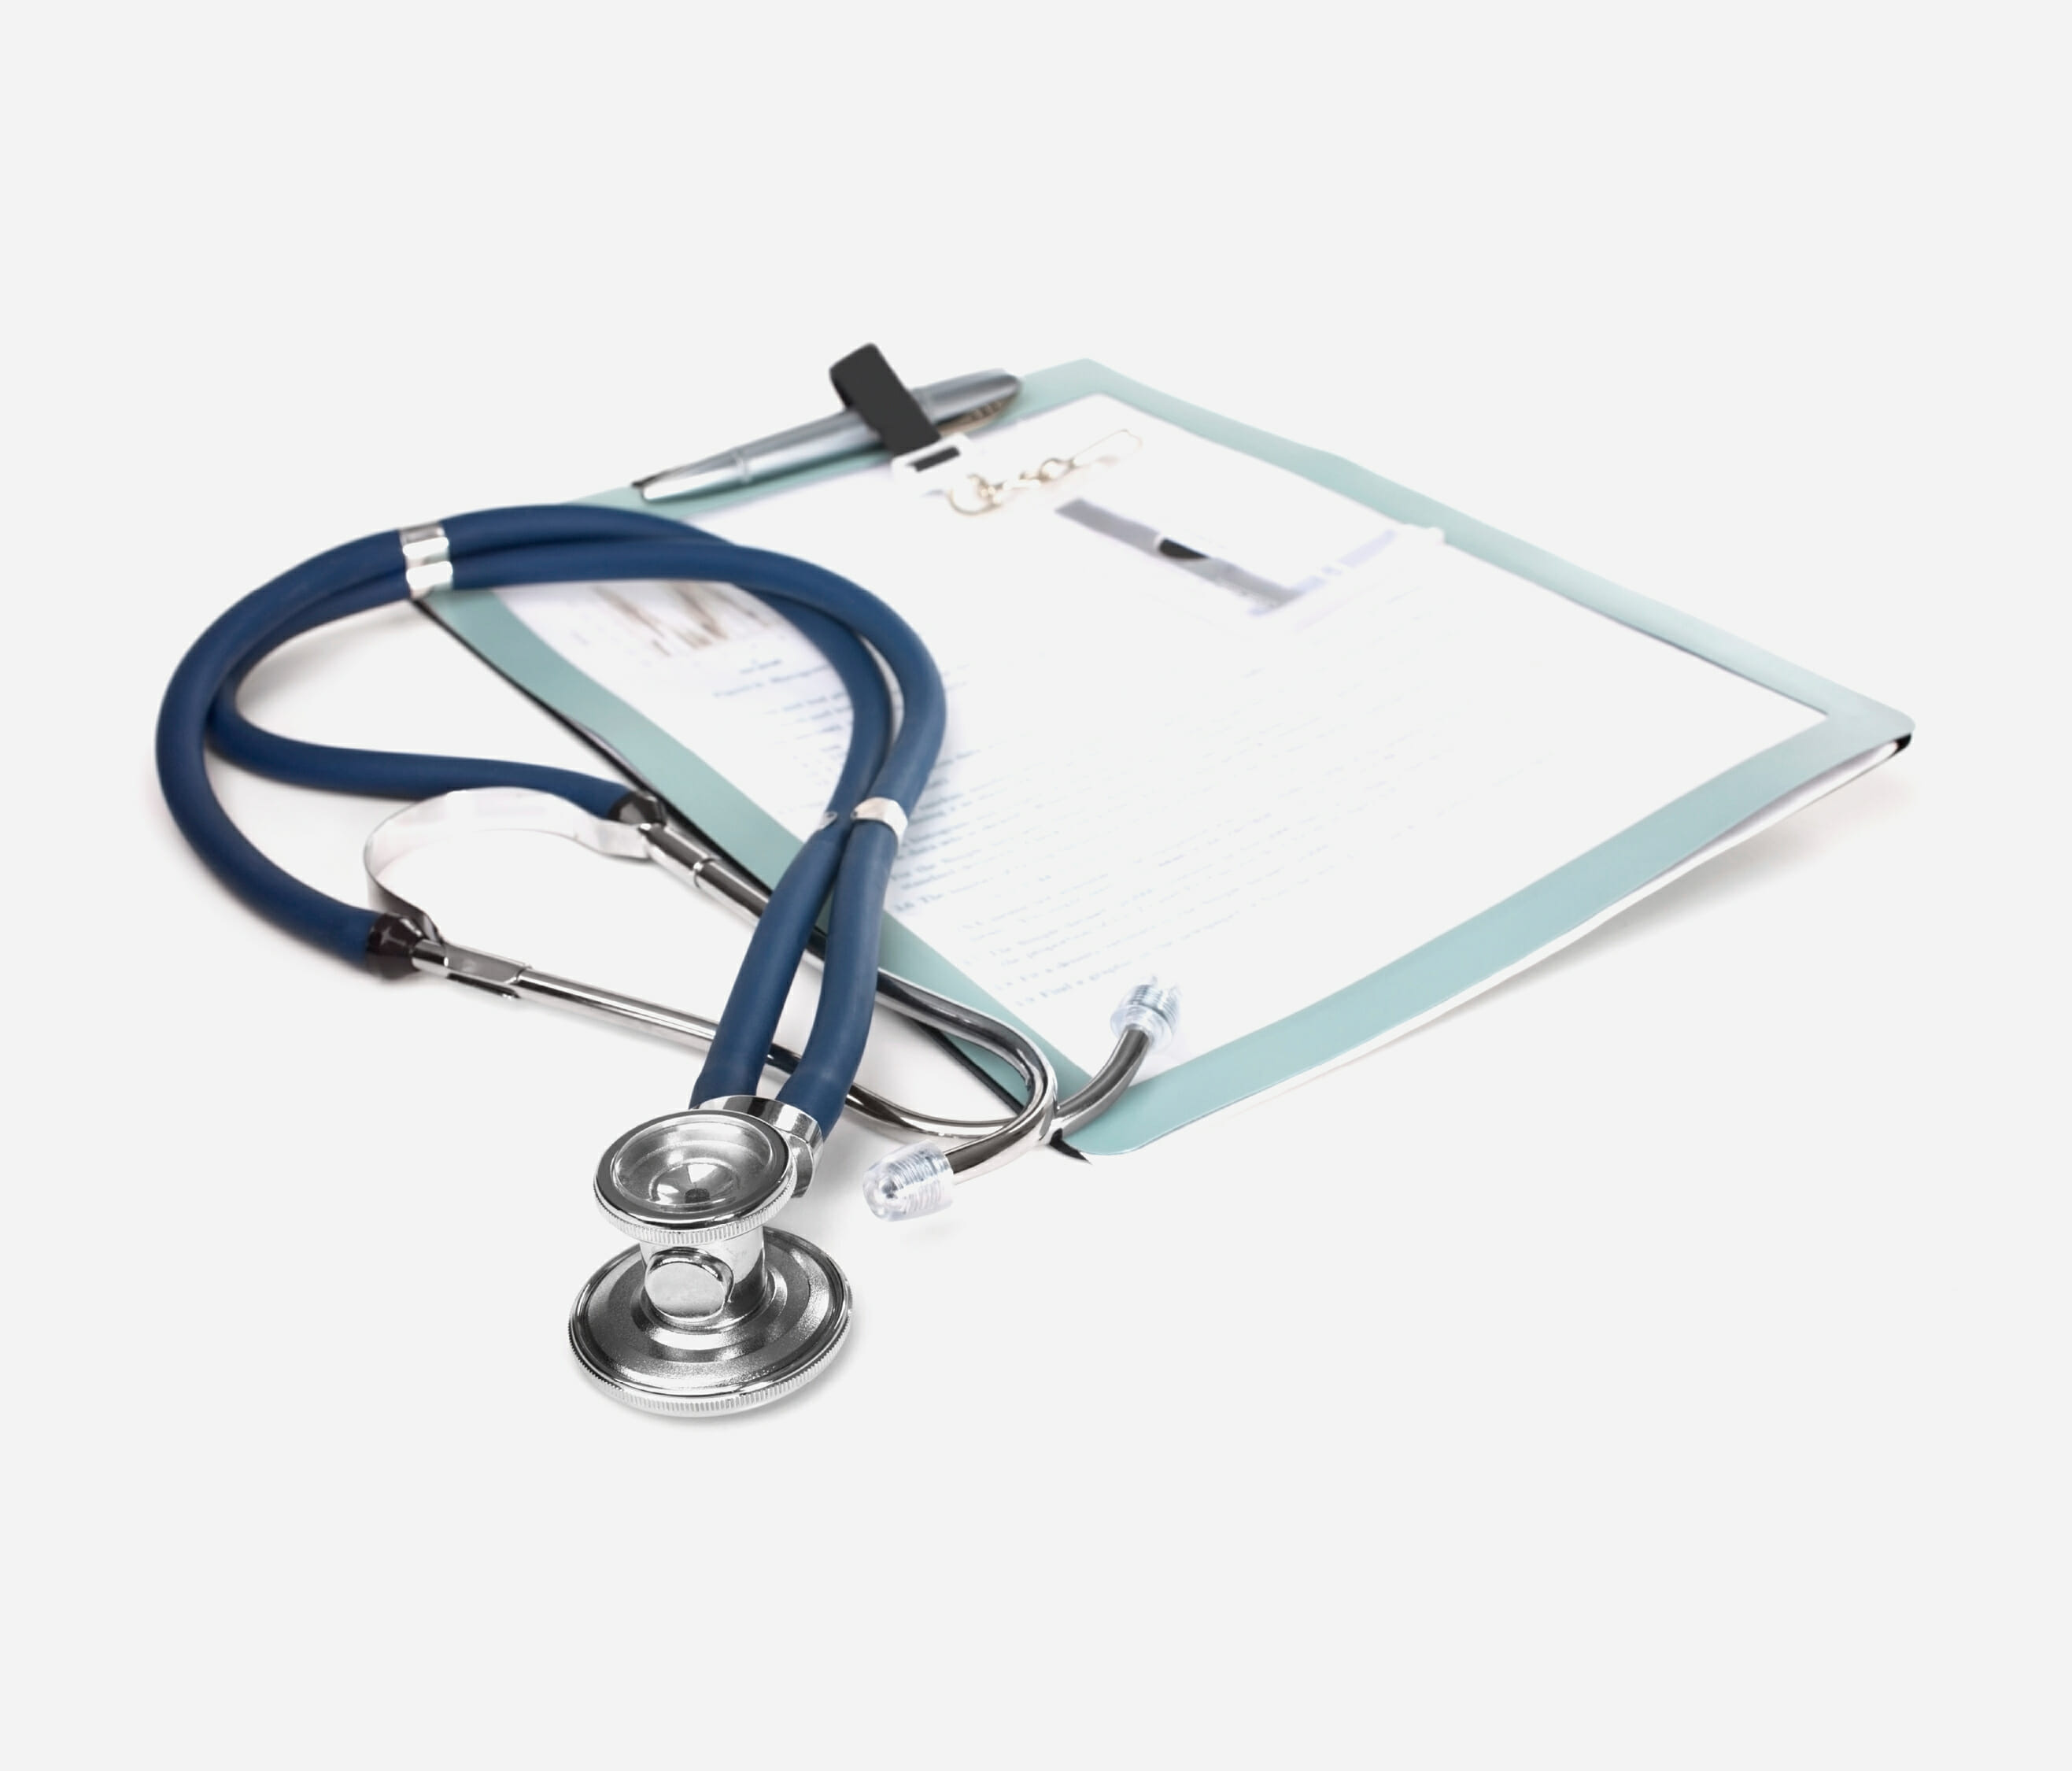 stethoscope and clipboard